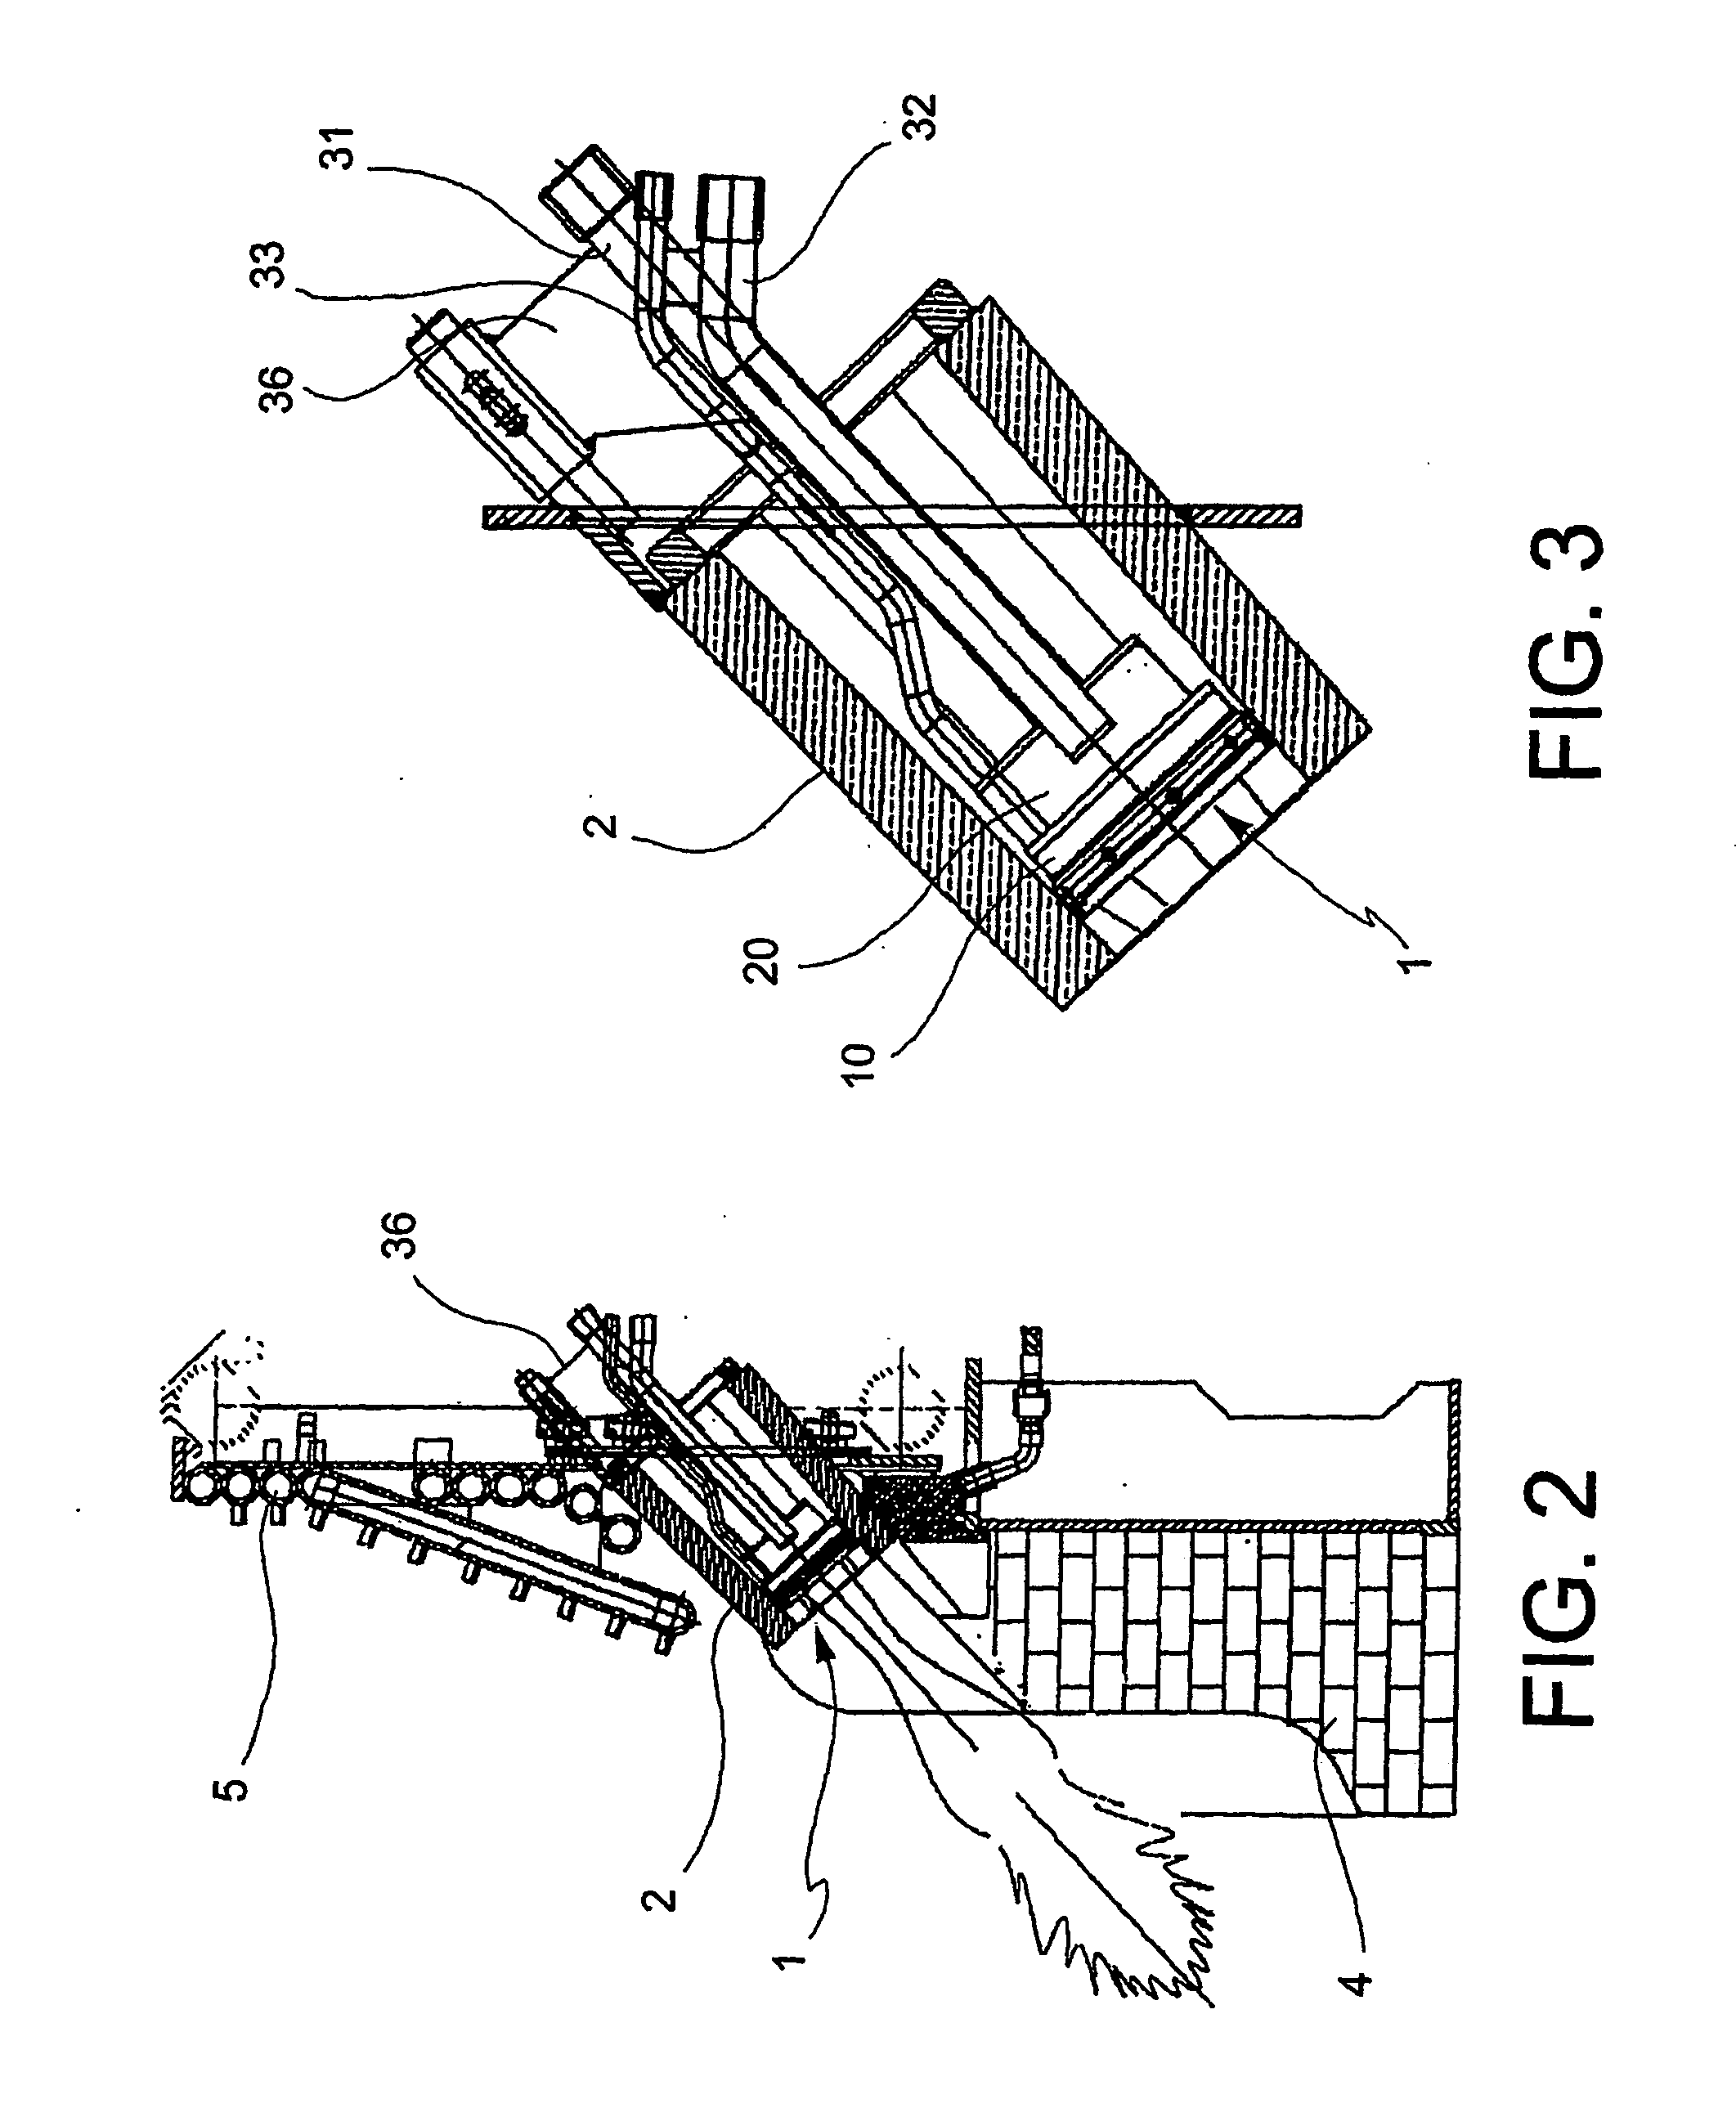 Injector for Arc Furnace